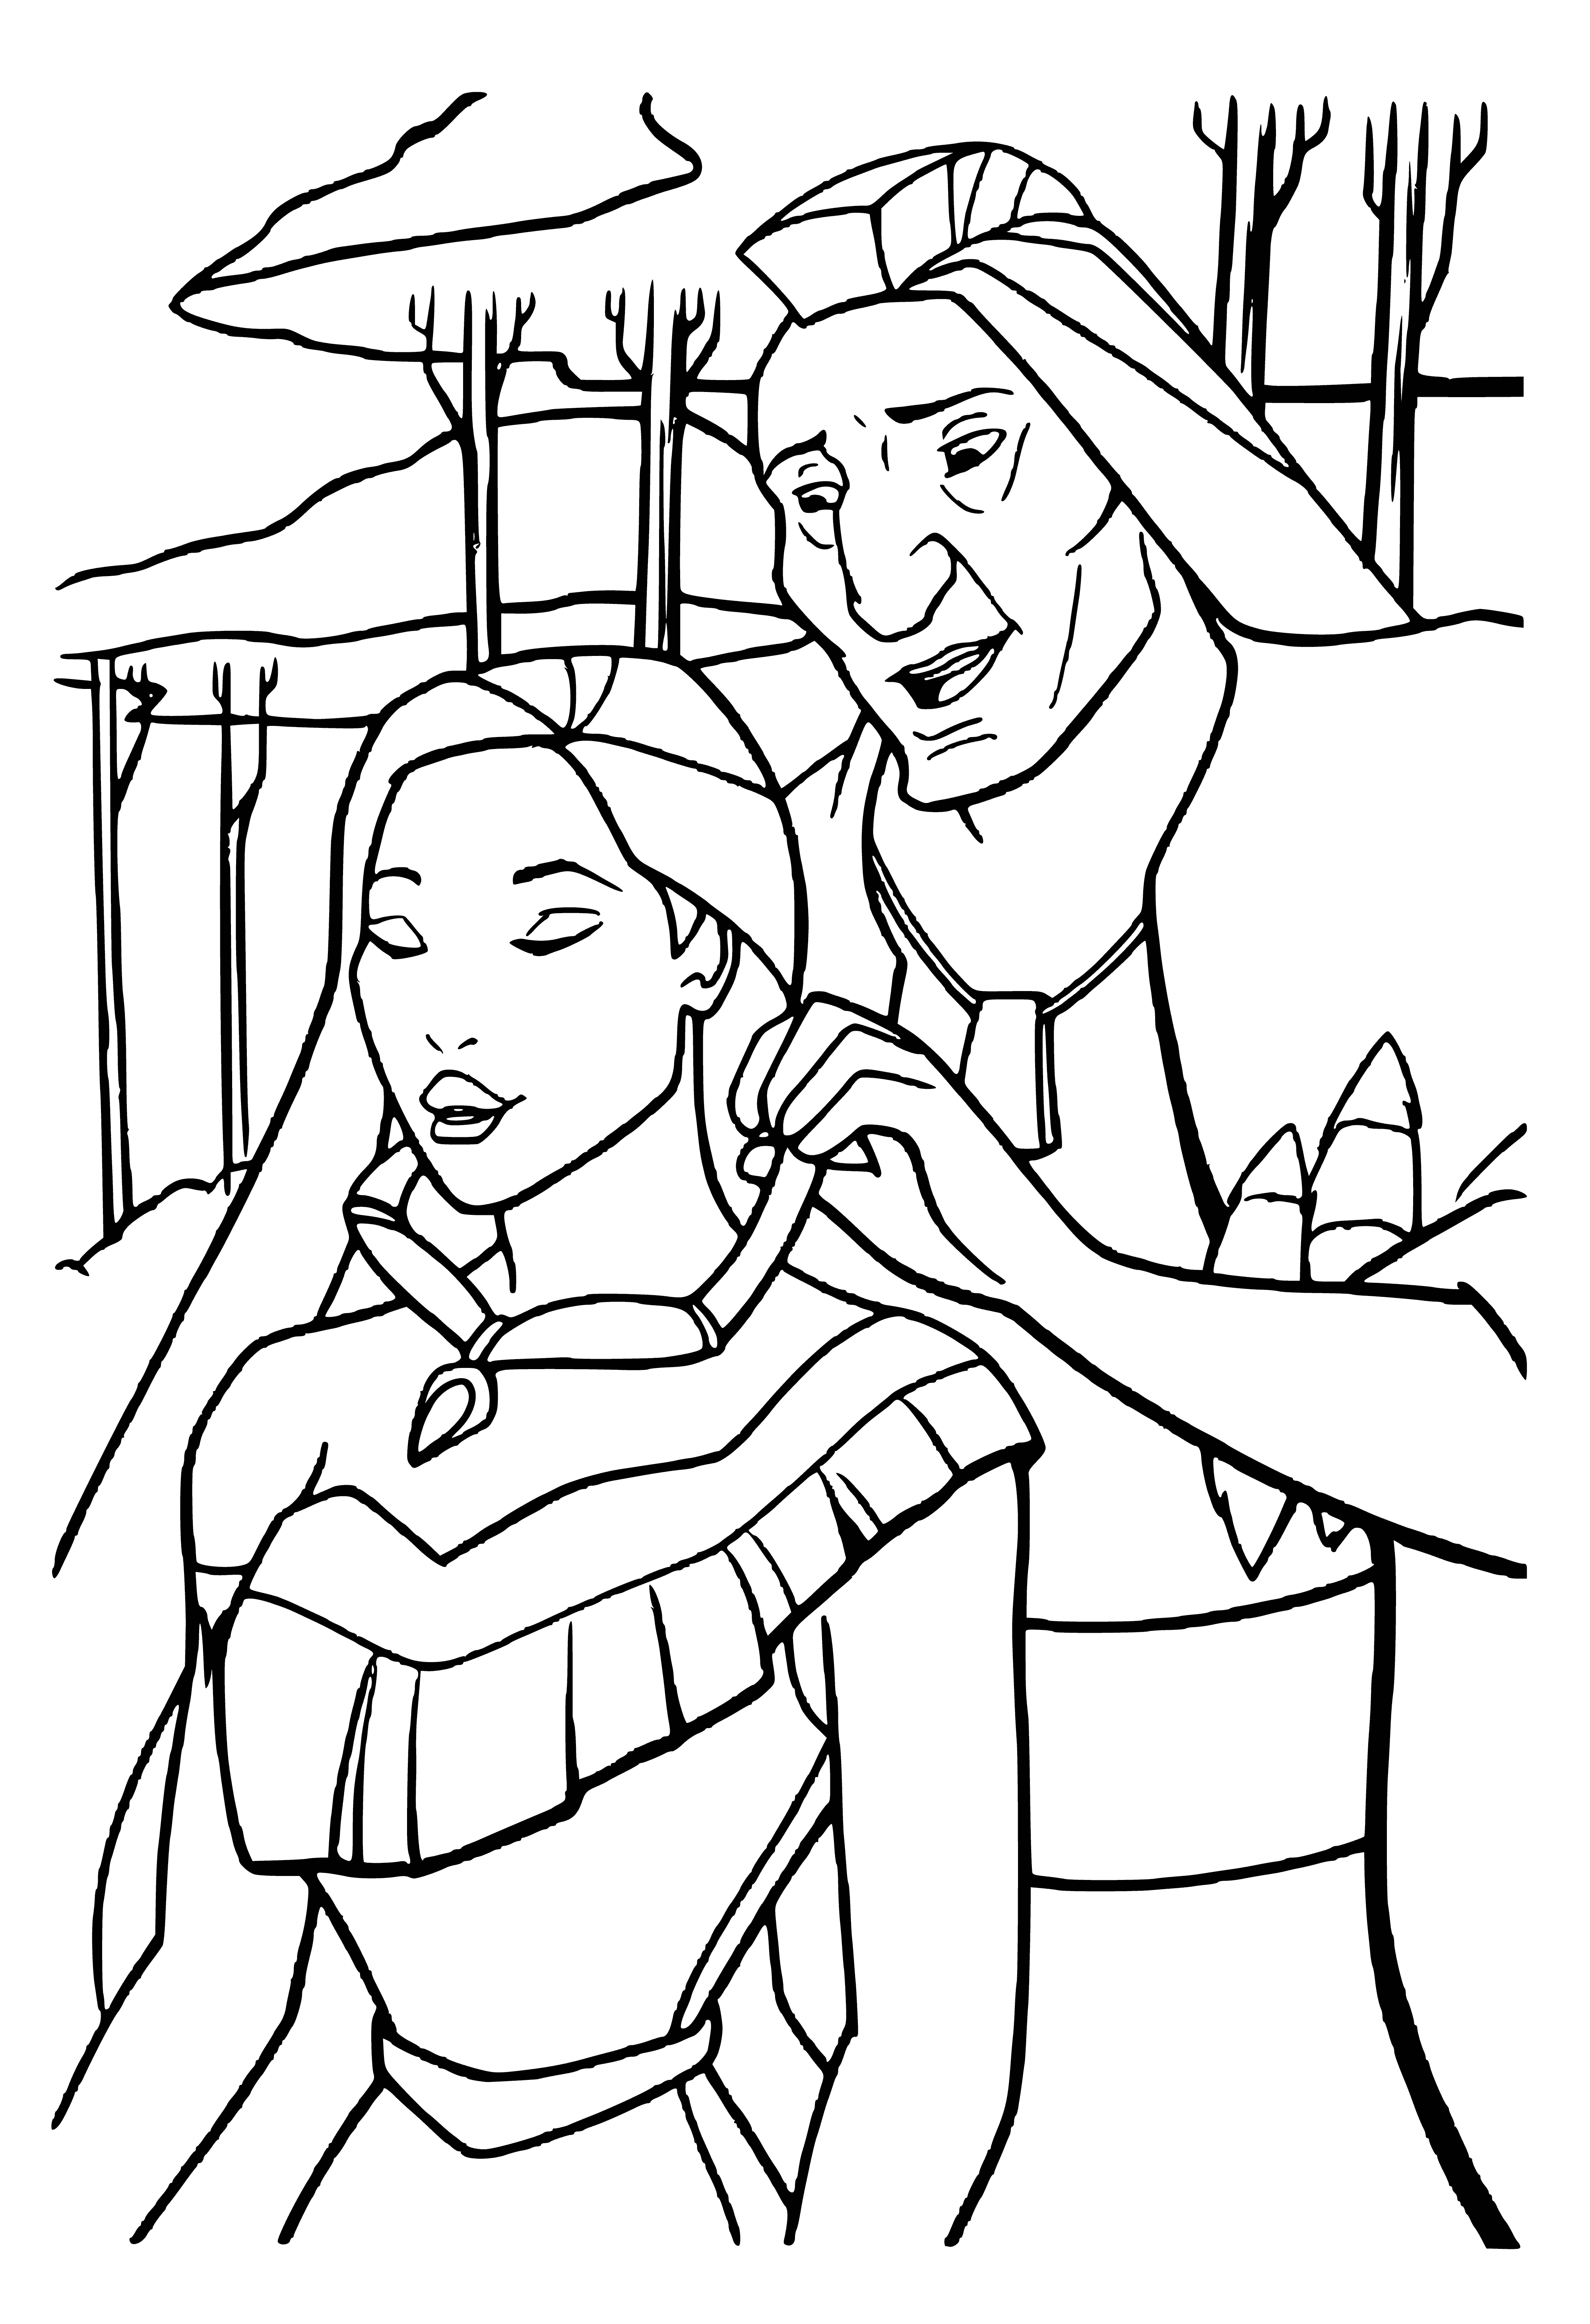 coloring page: Father holds necklace out to mother - large dark stone in center surrounded by feathers and beads.